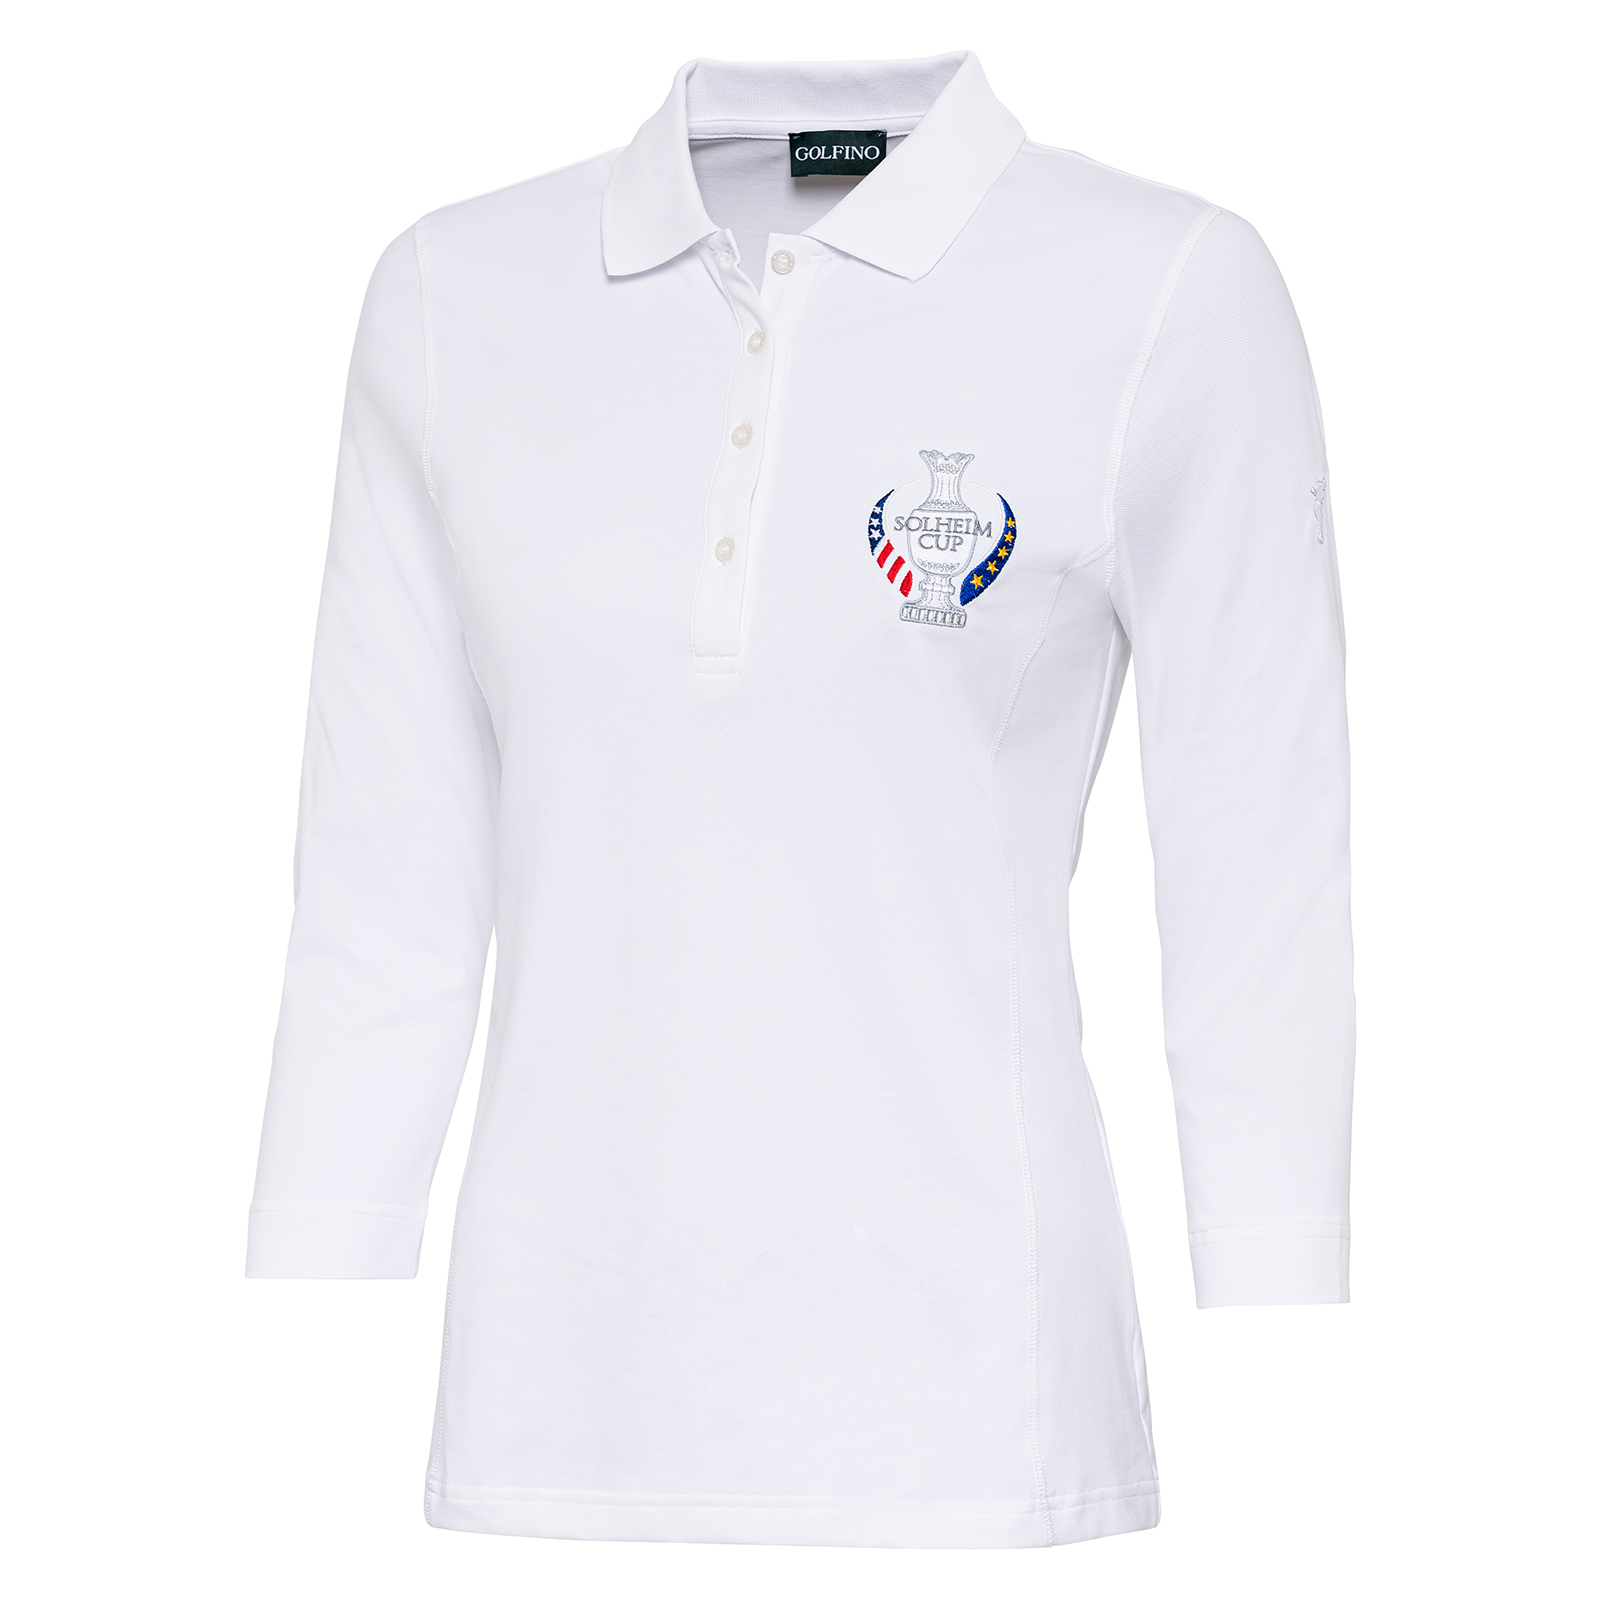 Ladies' polo shirt with UV function and Solheim Cup design